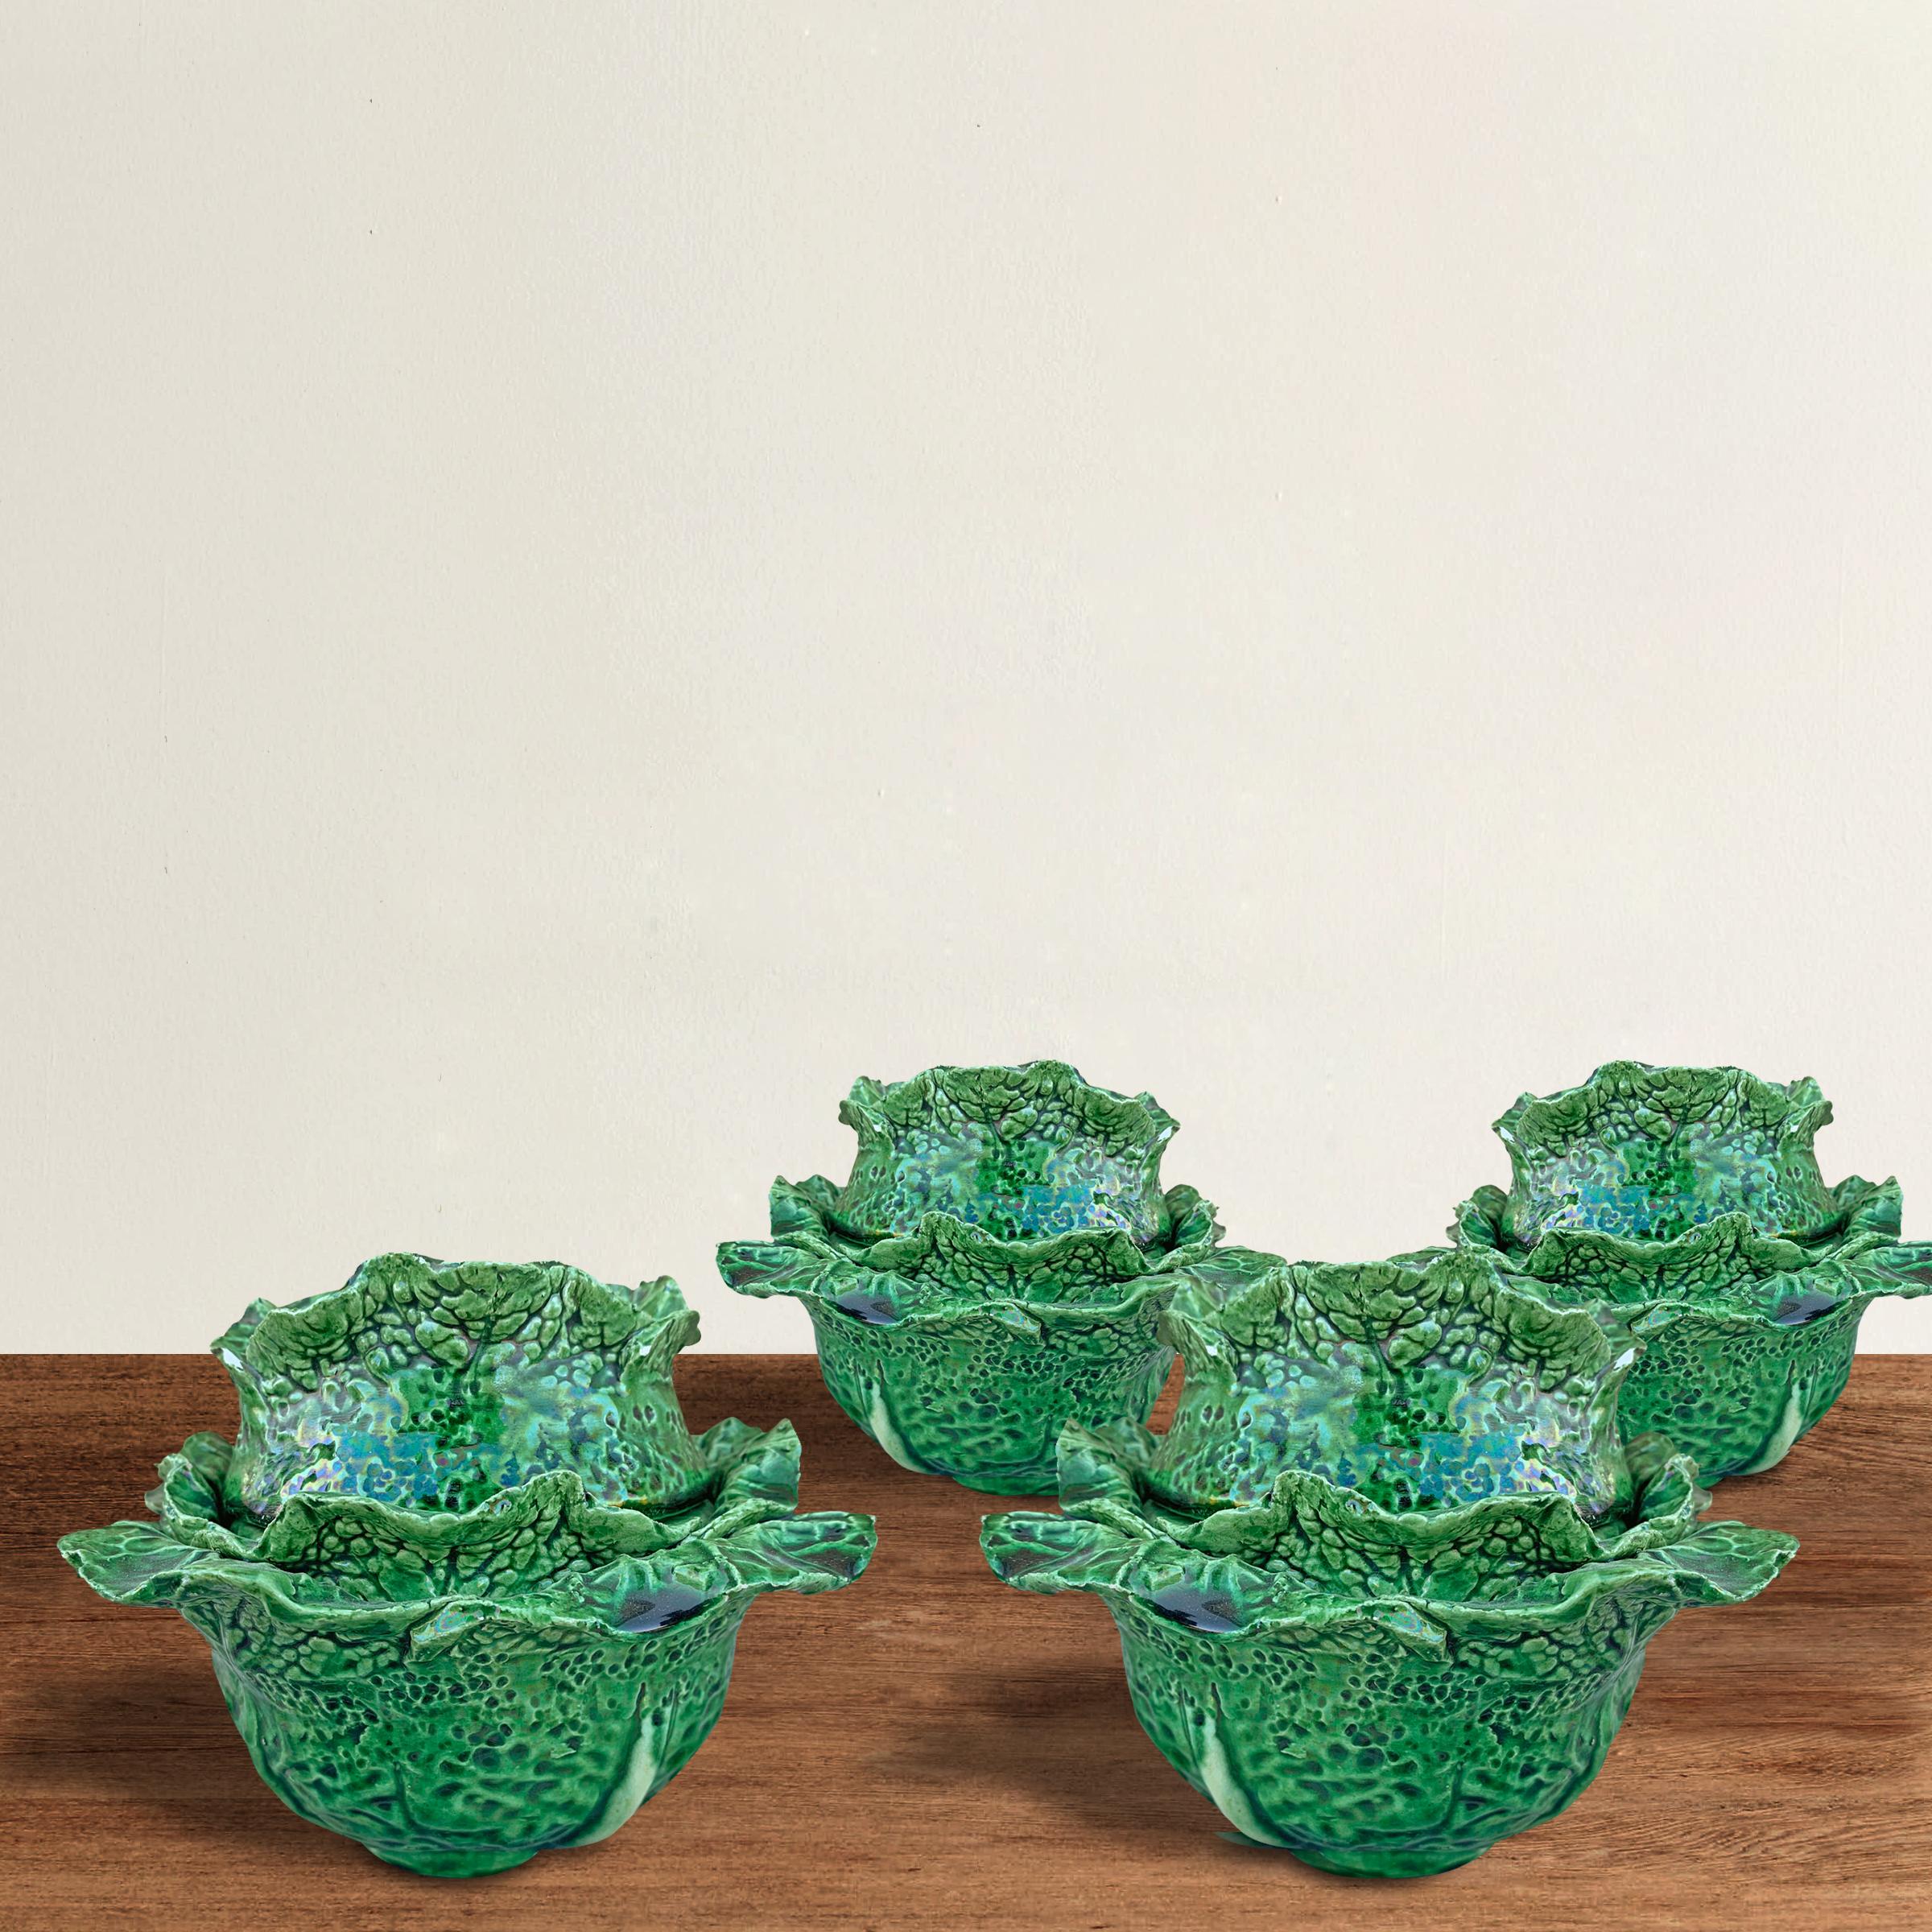 A fantastic and whimsical set of four early 20th century Portuguese hand-built ceramic covered cabbage bowls in the style of Dodie Thayer. Perfect for display on a shelf or table, but also fully functional for nuts and candies at your next cocktail